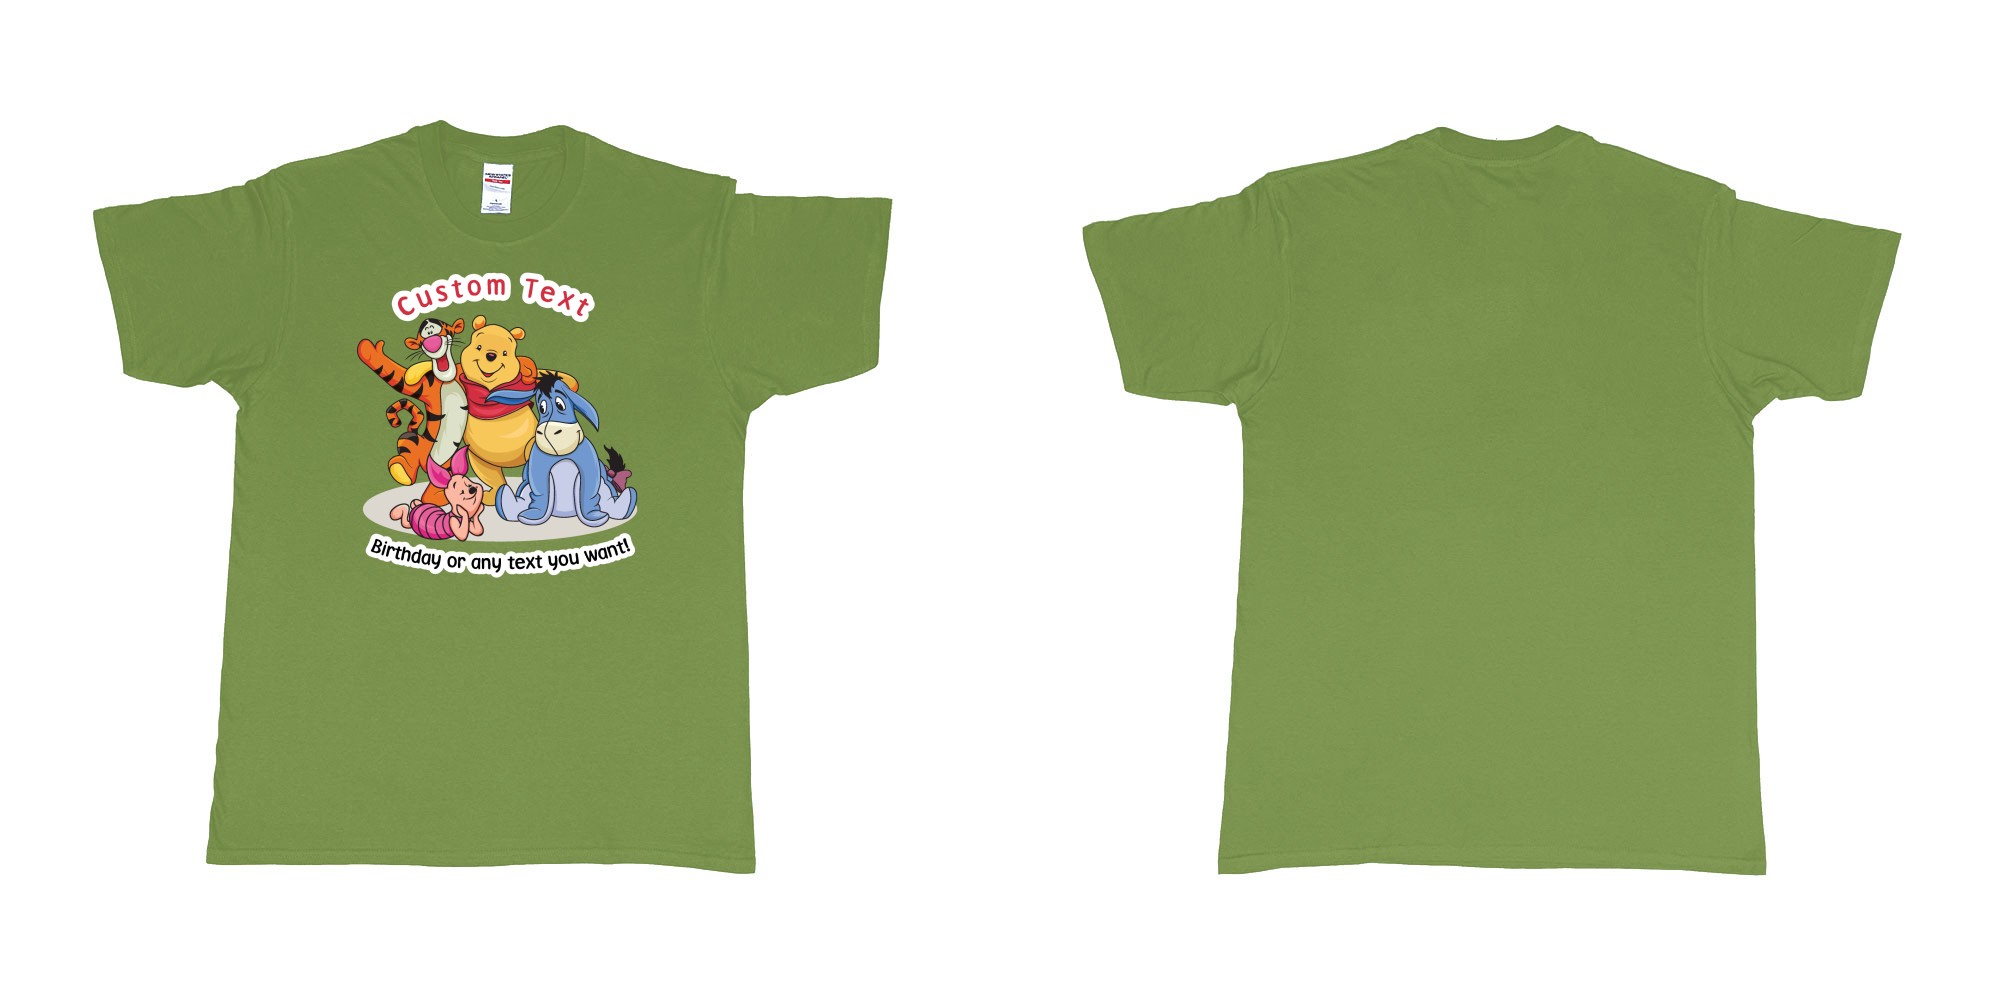 Custom tshirt design winnie the pooh and friend in fabric color military-green choice your own text made in Bali by The Pirate Way